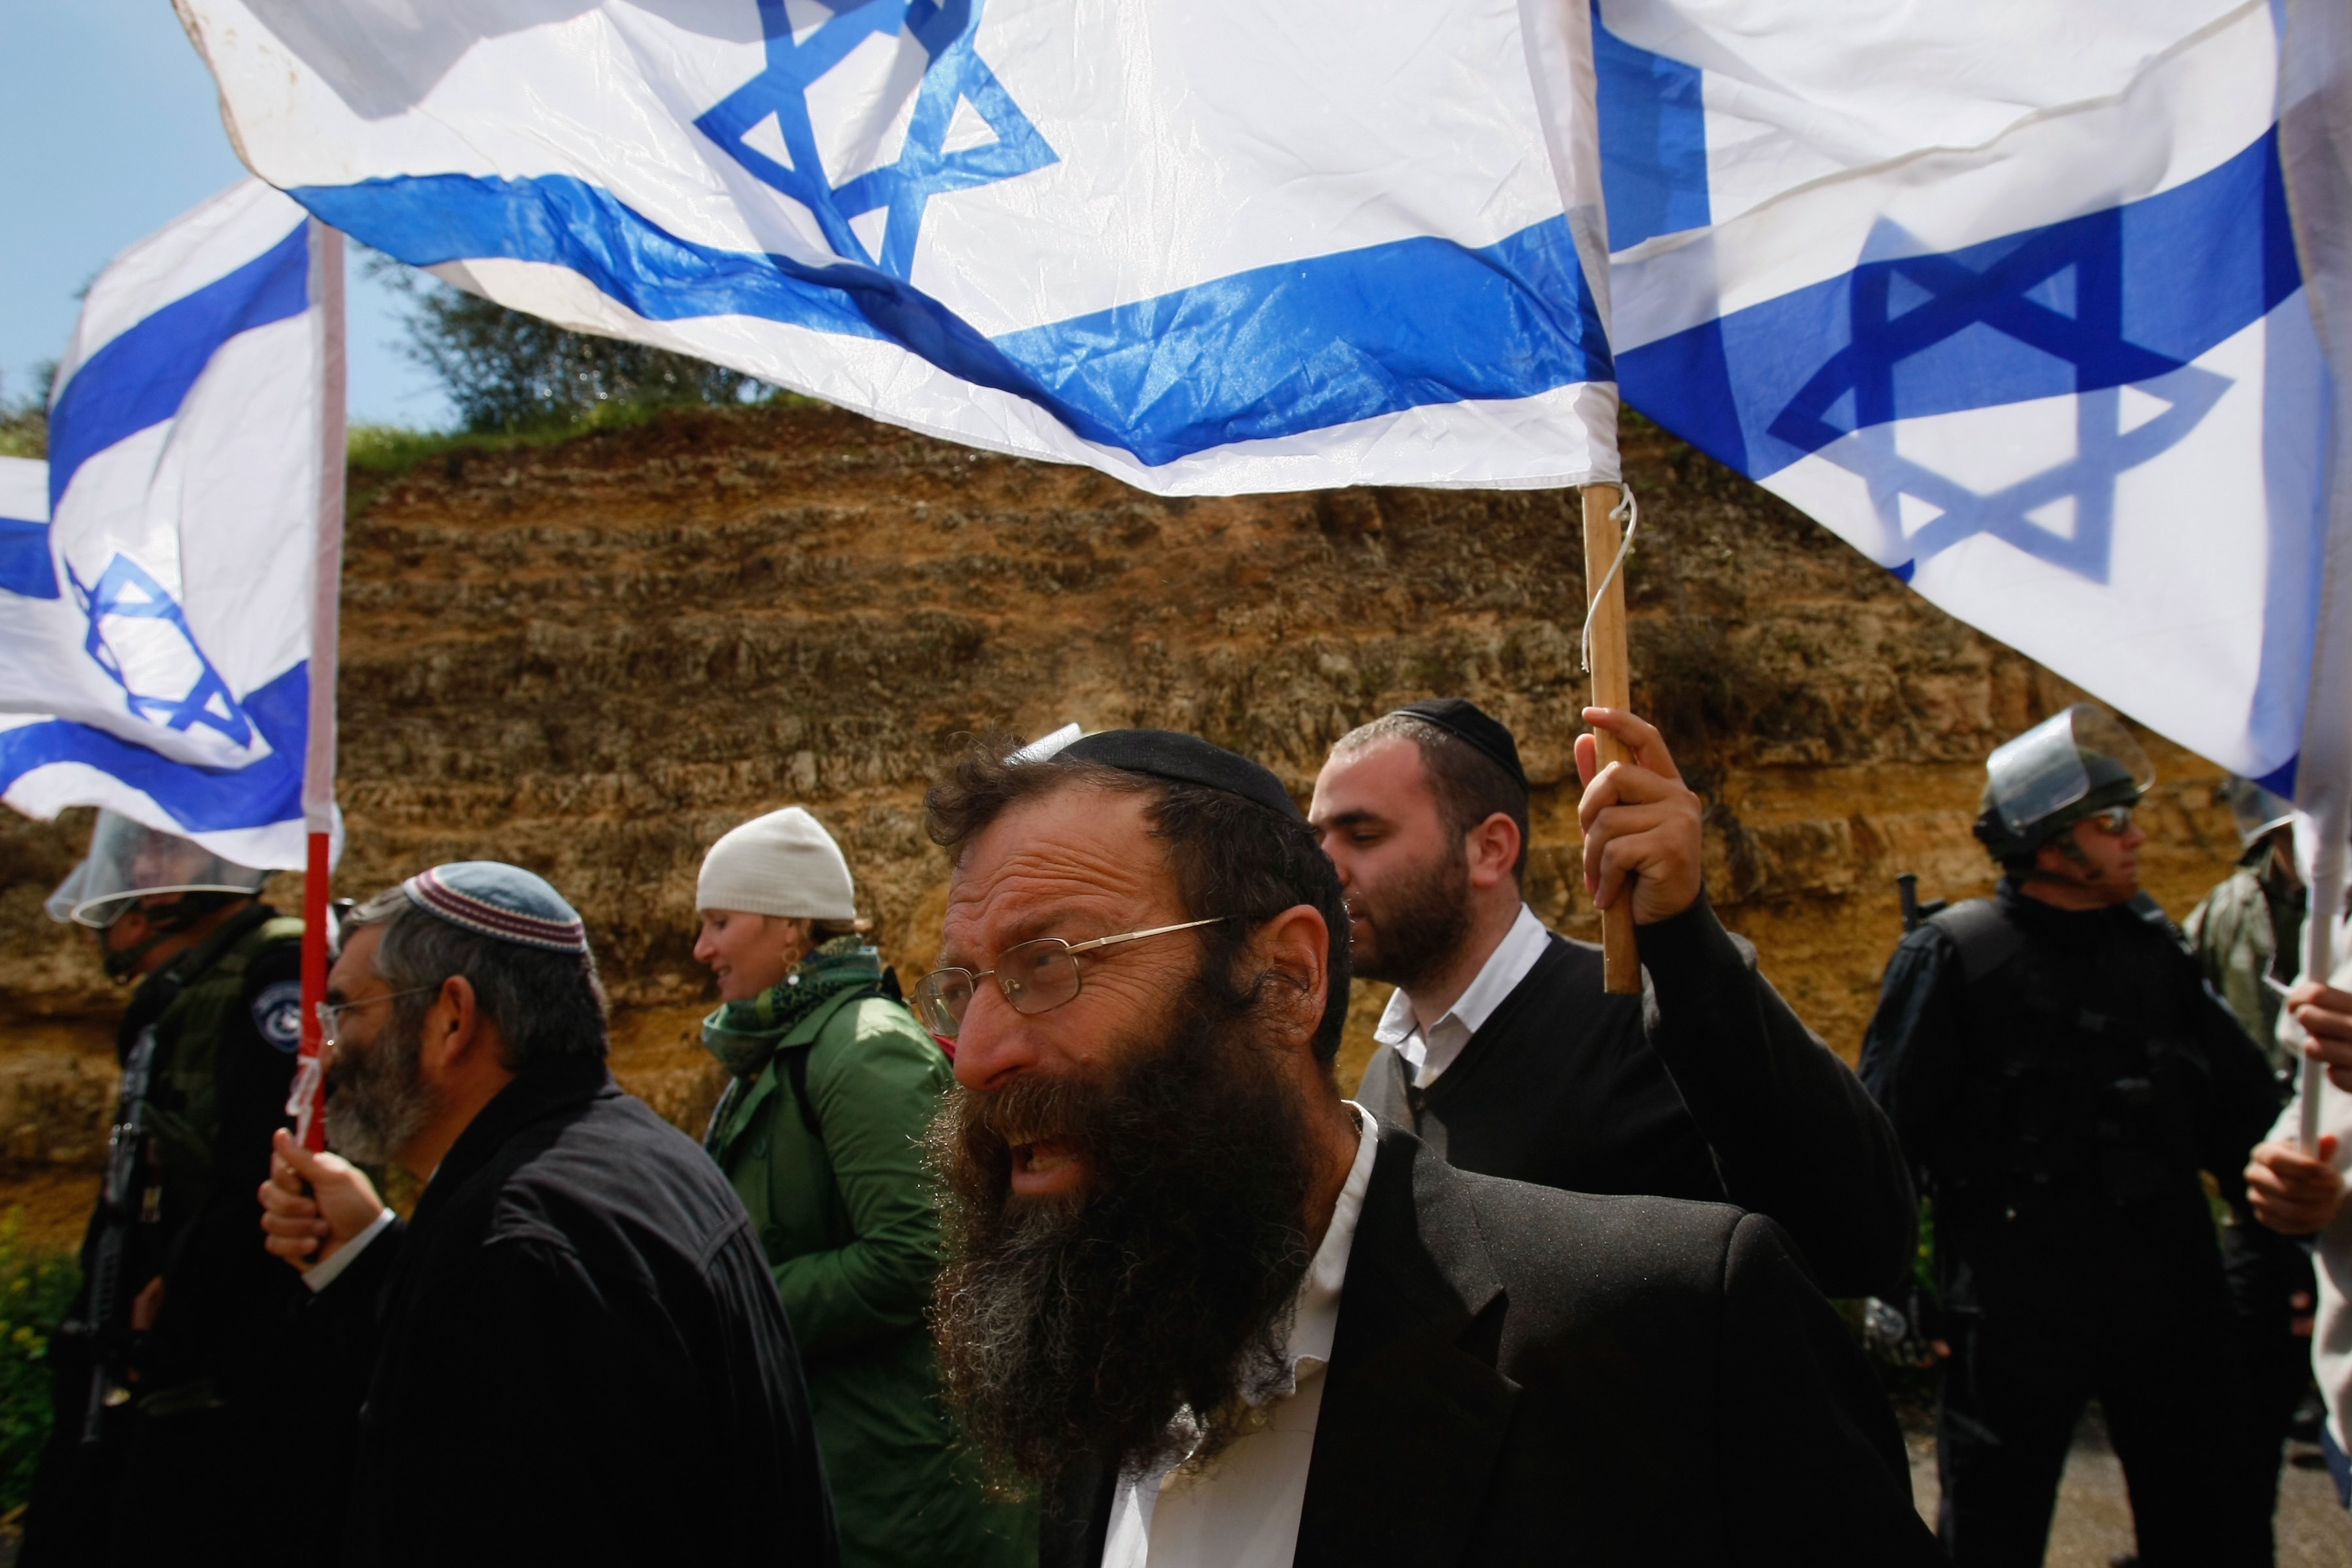 David Silverman/Getty Images. Right-wing Israeli extremist Baruch Marzel (C) leads a provocative march with flags March 24, 2009 in Umm al-Fahm in northern Israel. Violent clashes broke out between residents of Israel's largest Arab city during of the rally.